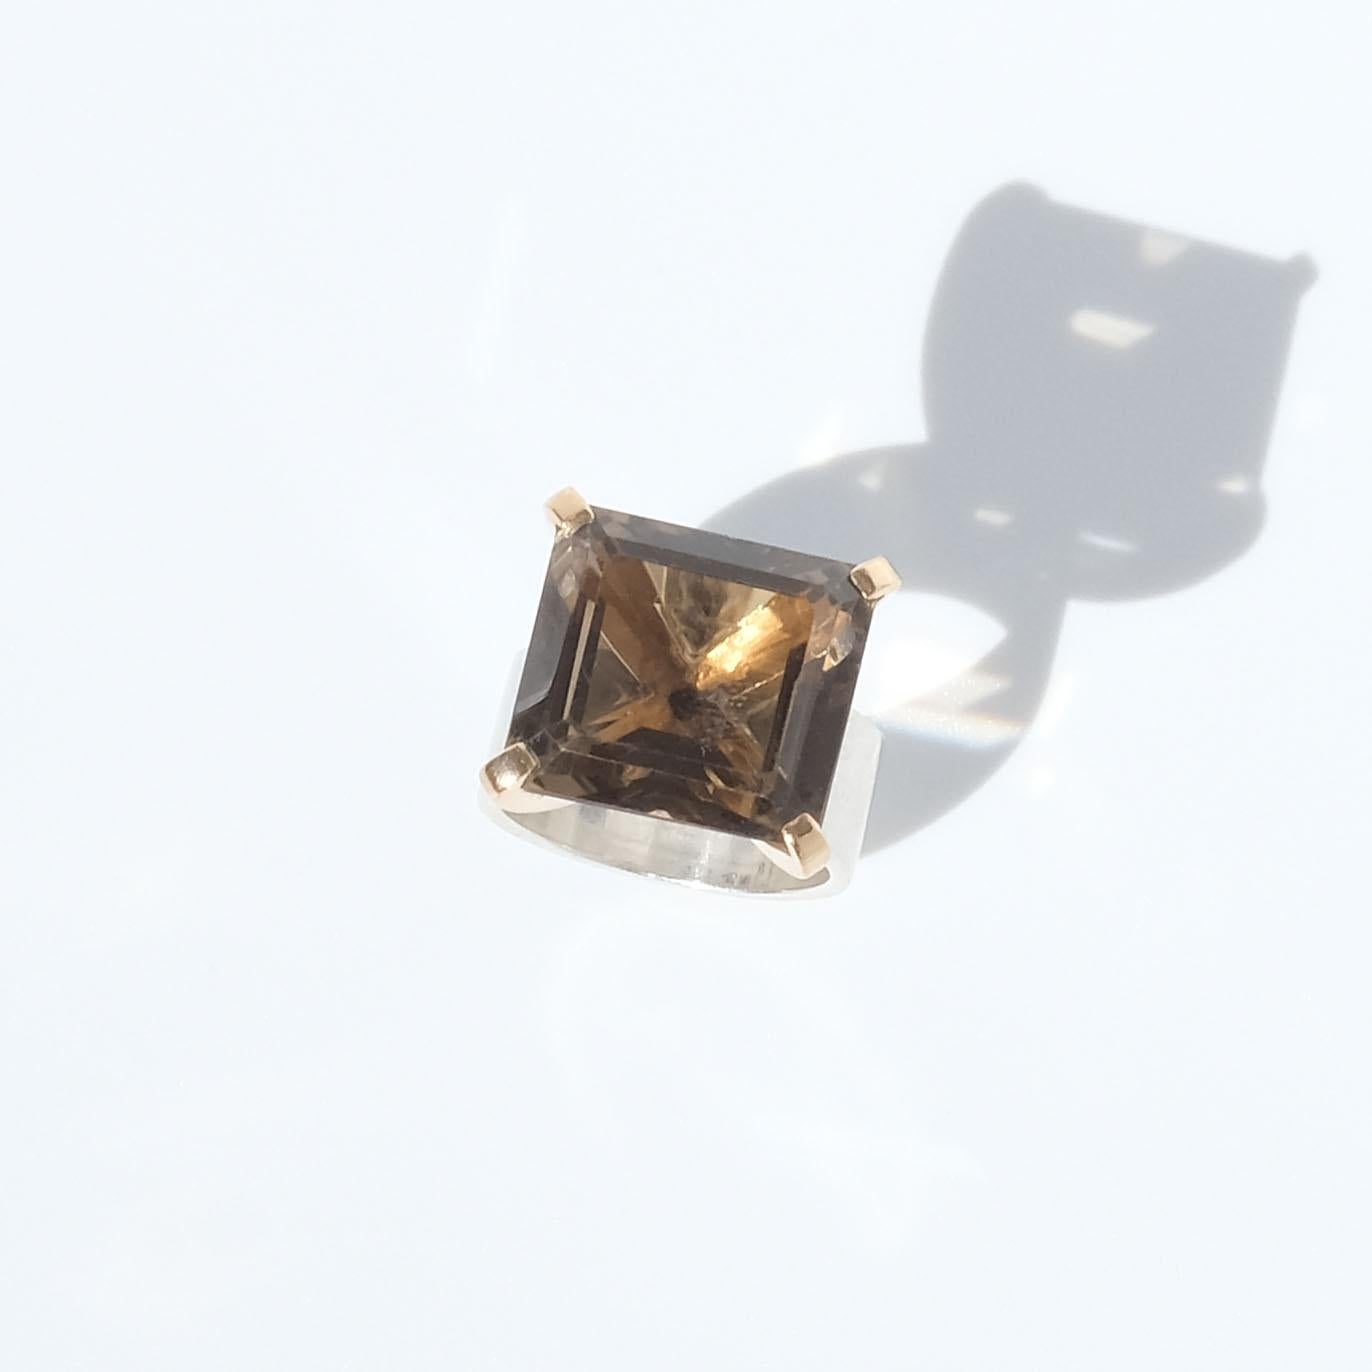 This sterling silver ring is adorned with a large, square, faceted smoky quartz stone. The head of the stone is distinct and its gilded prongs prominent. The shank of the ring. made of 18k gold, is beautifully wide and creates a strength in the